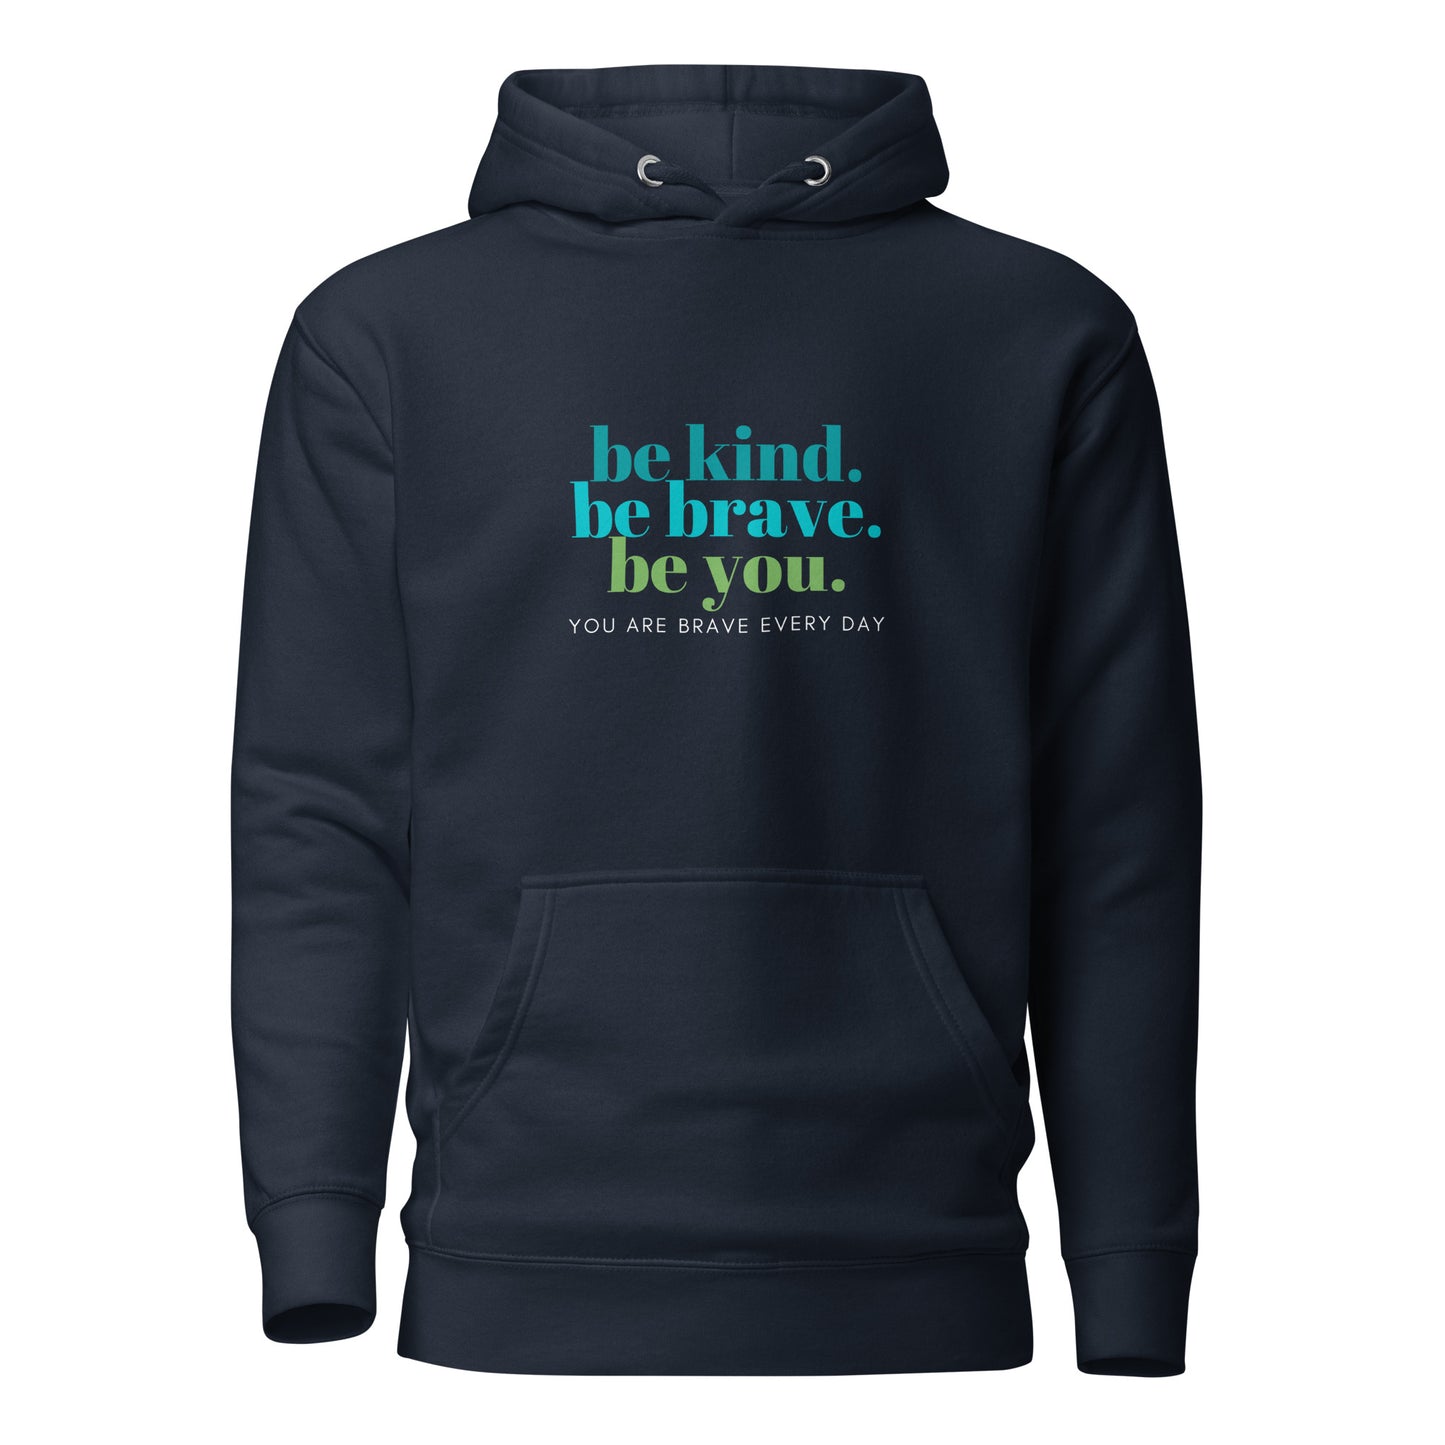 Unisex Hoodie - be kind. be brave. be you.